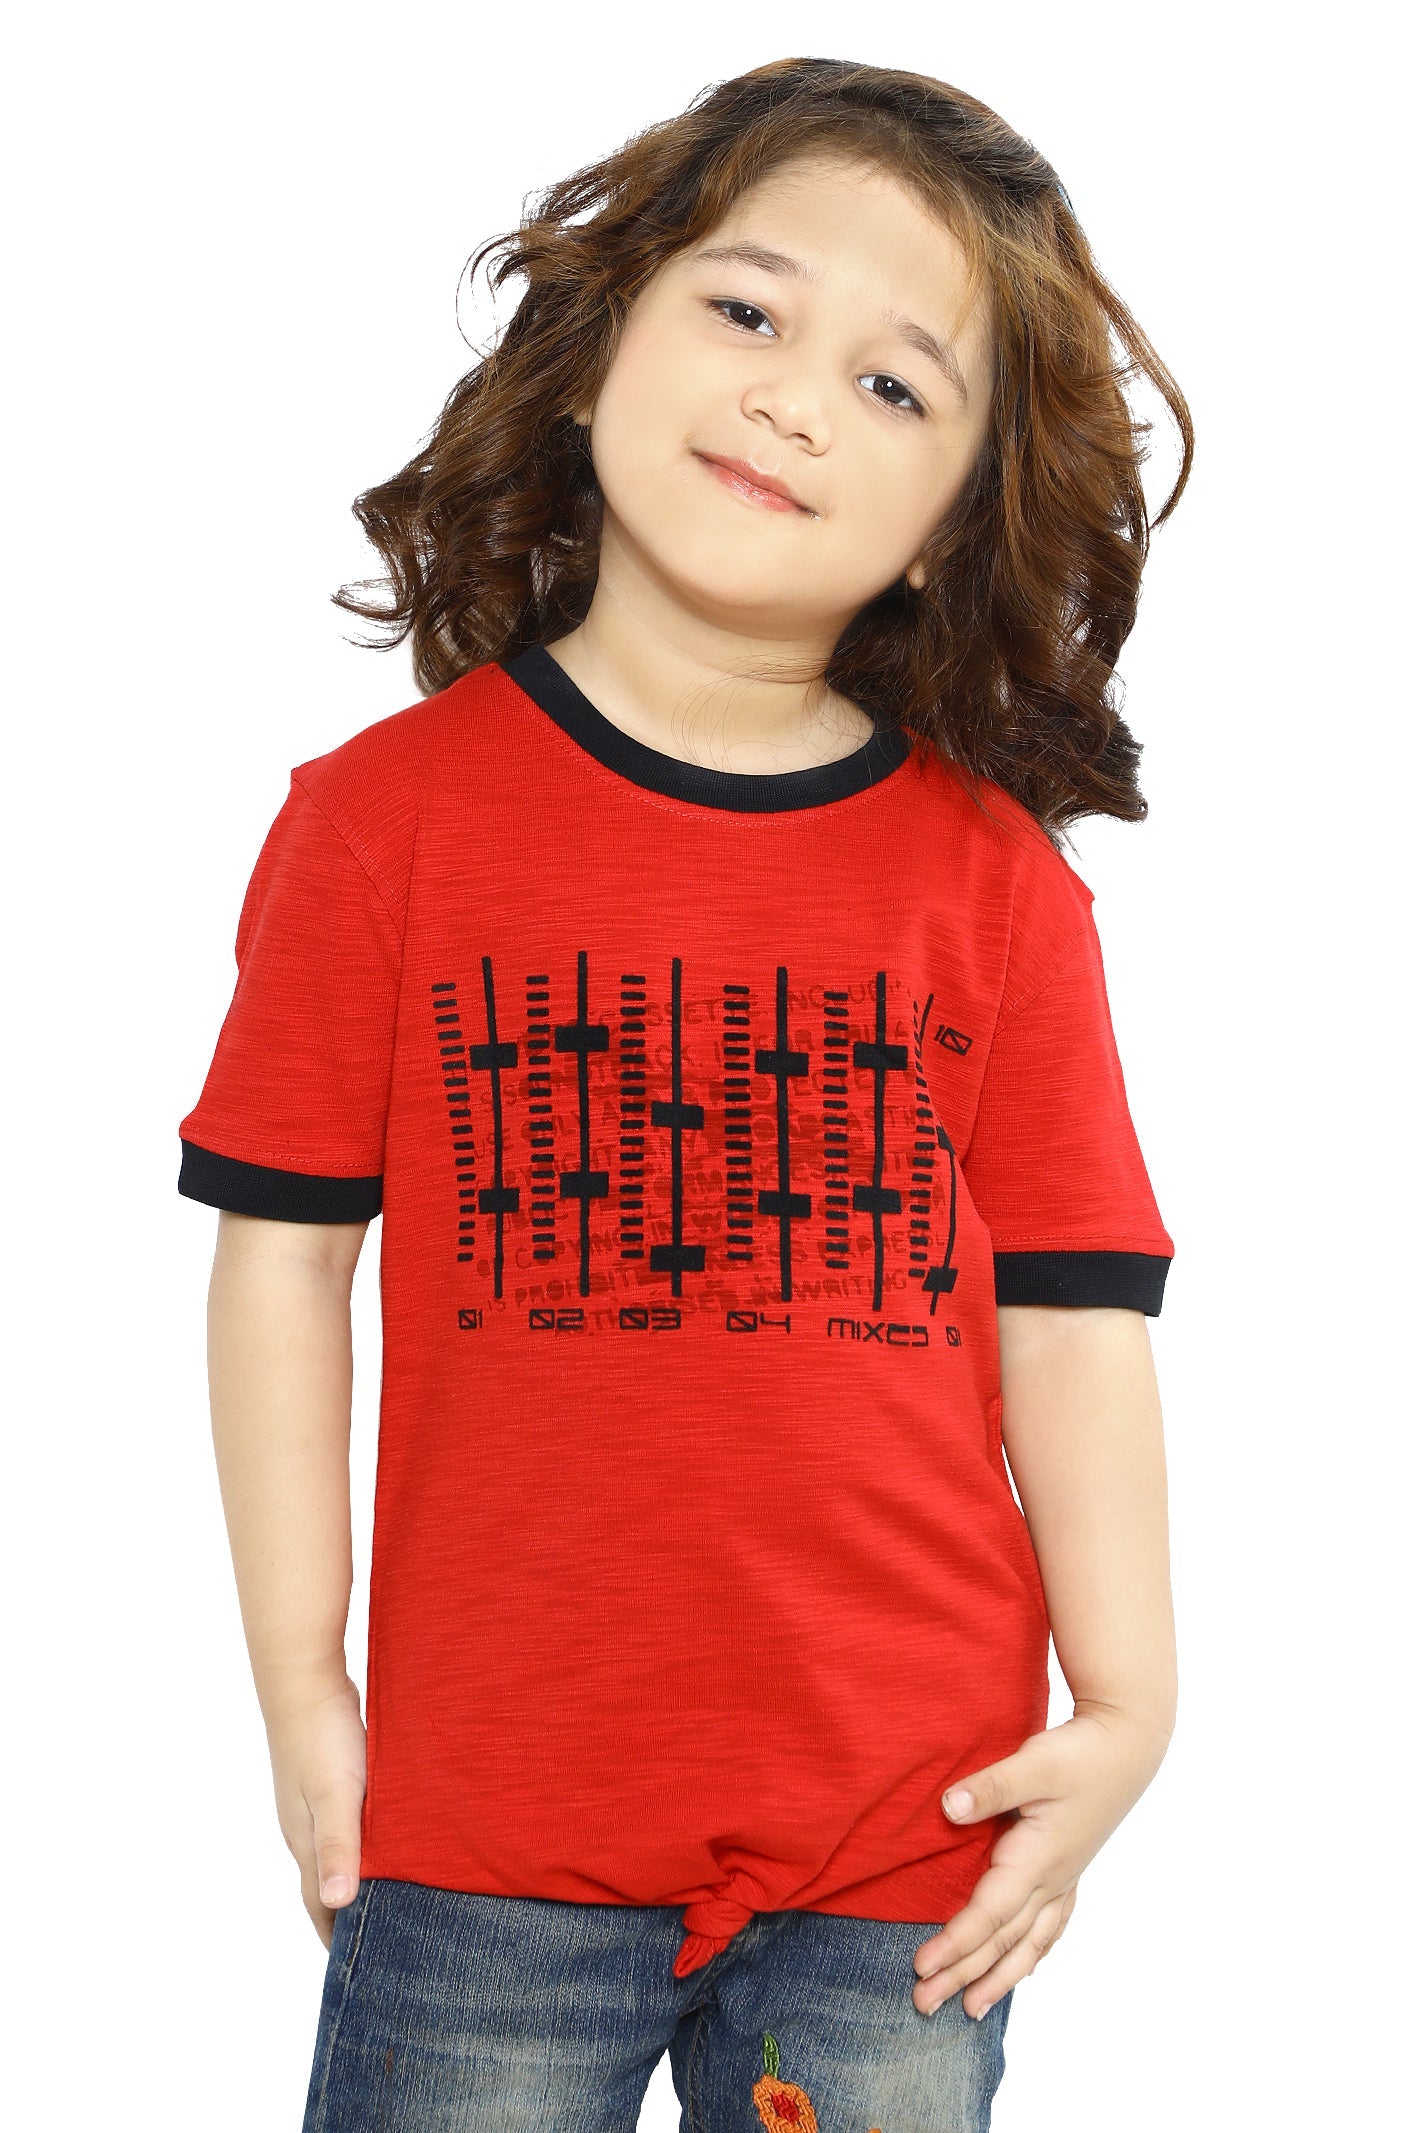 Girls T-Shirt In Red SKU: KGA-0237-RED - Diners